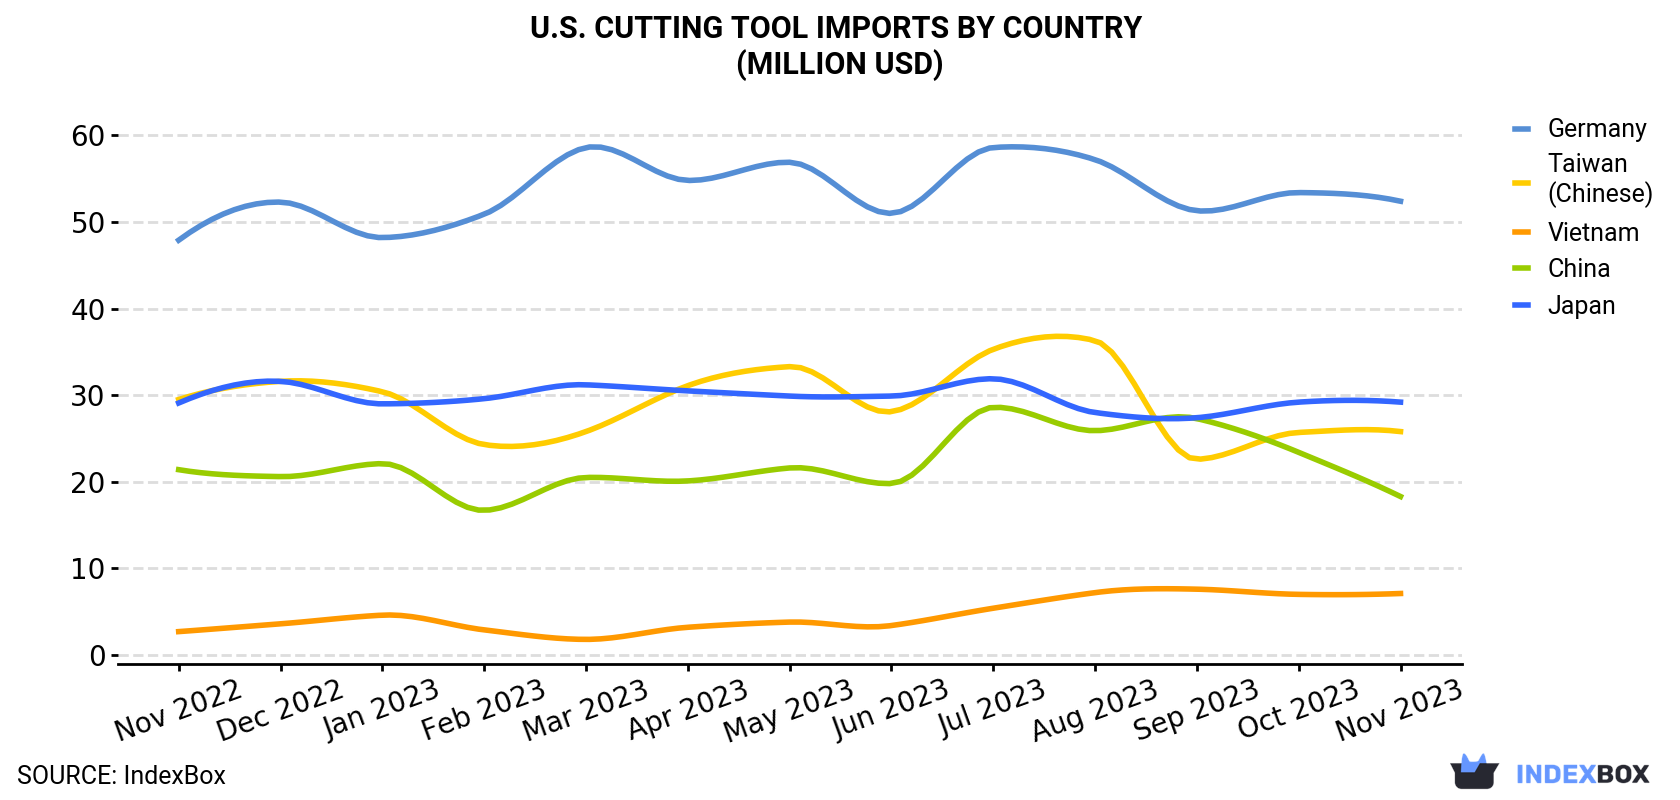 U.S. Cutting Tool Imports By Country (Million USD)